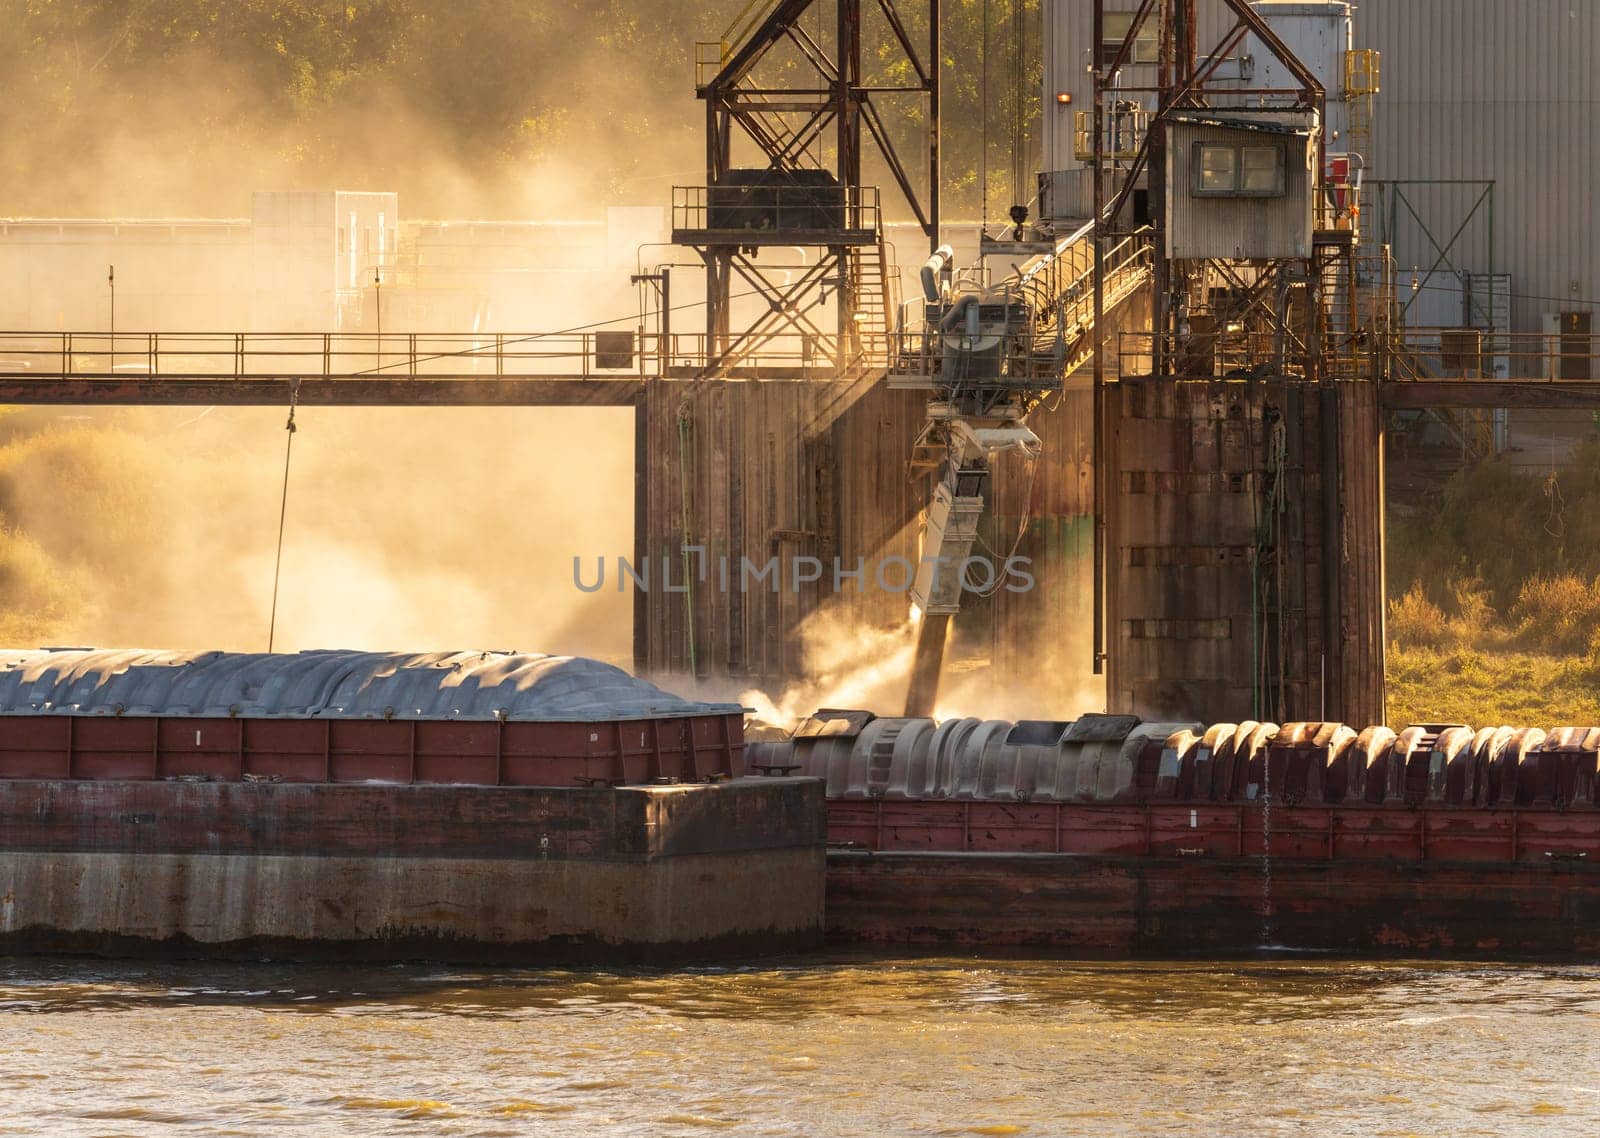 Grain being loaded into freight barges on Mississippi river by steheap